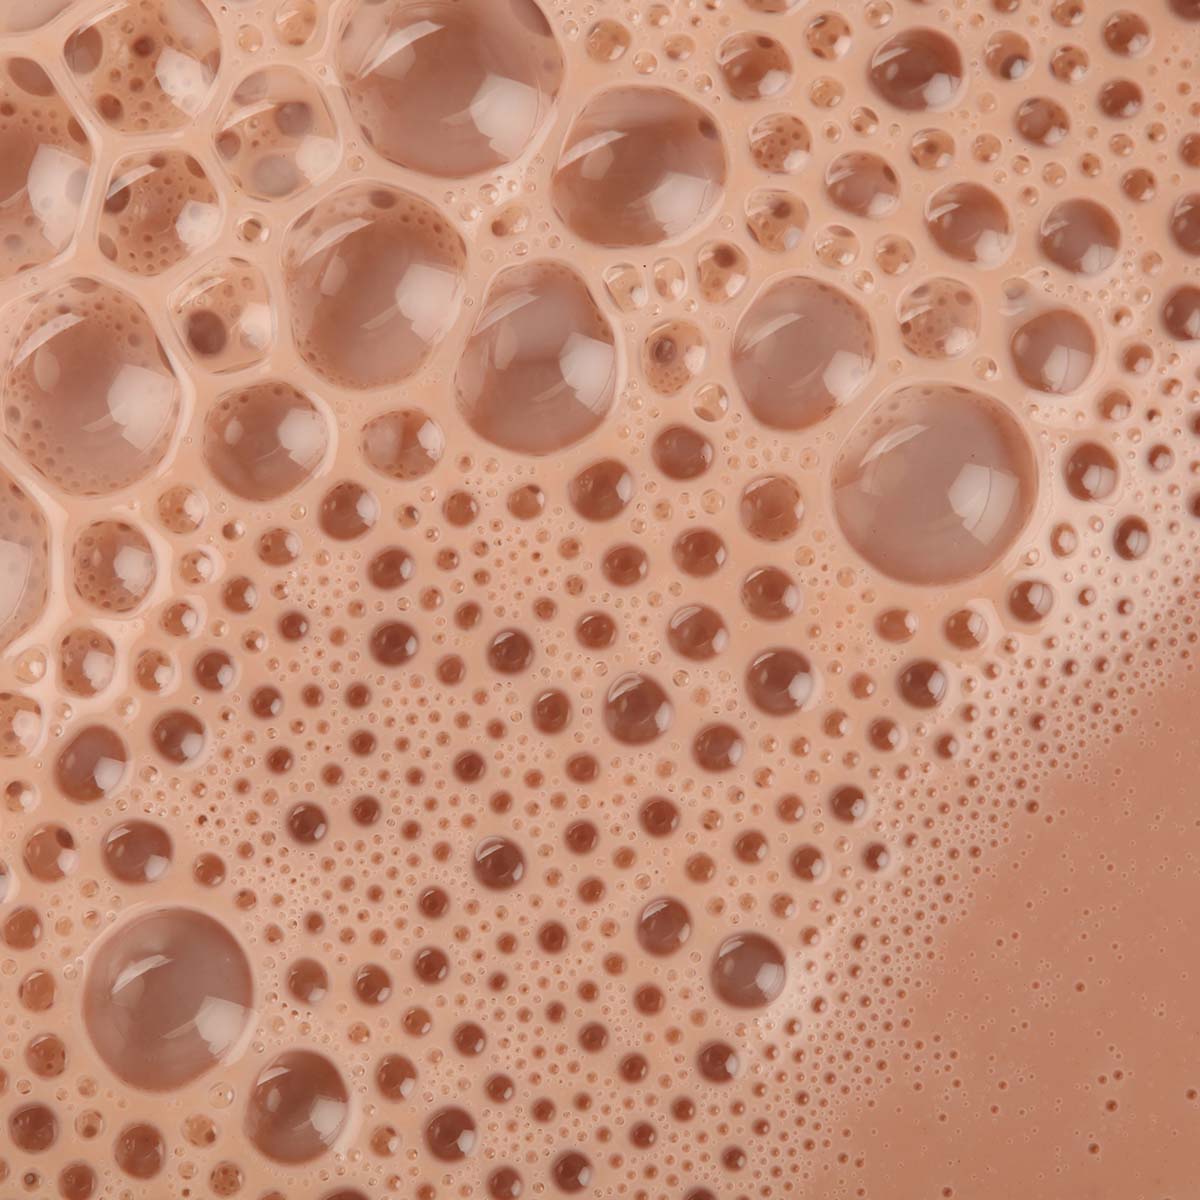 picture of chocolate flavored milk